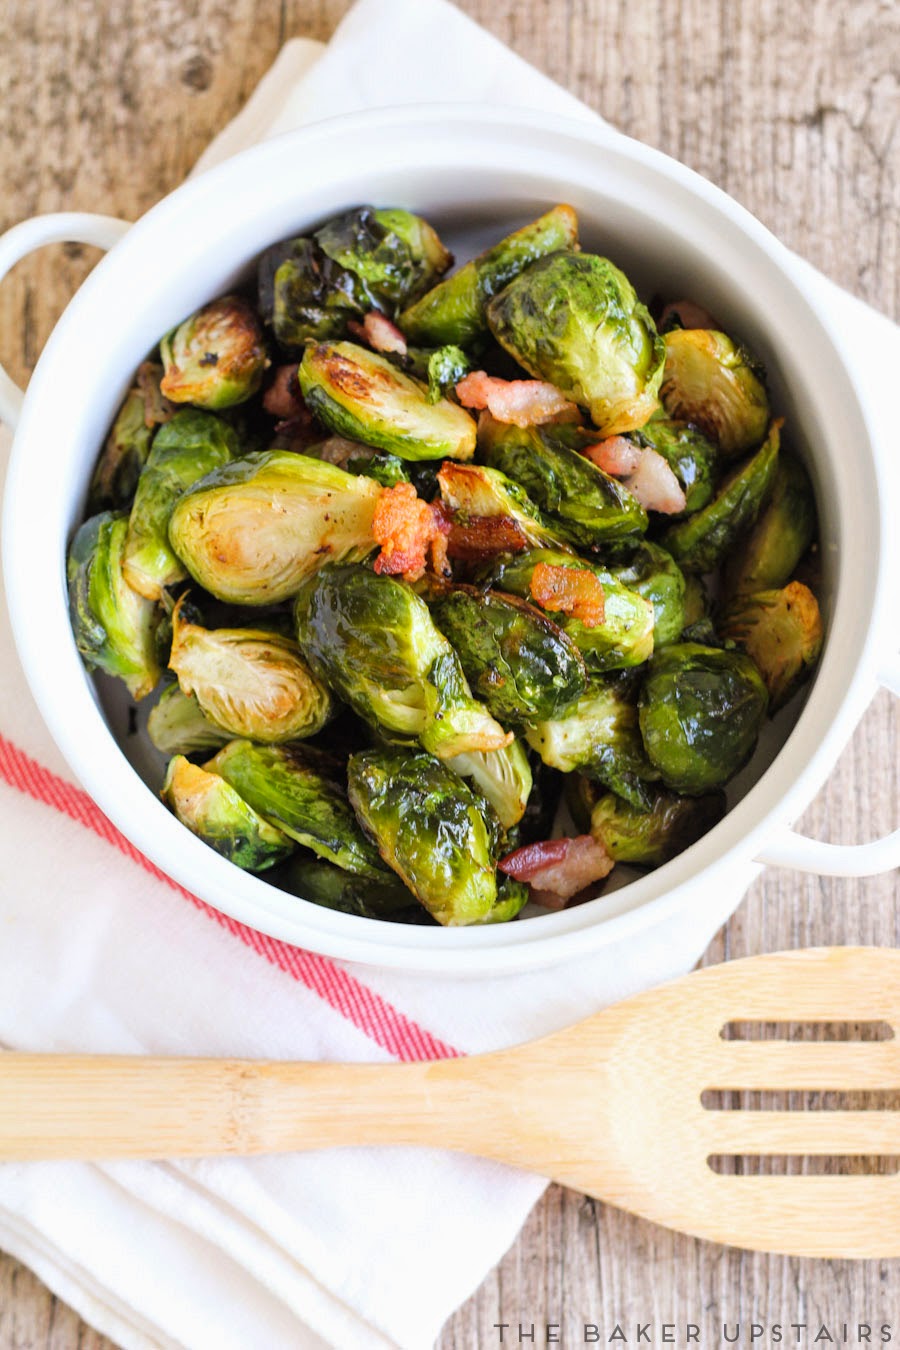 Roasted brussels sprouts with bacon - so deliciously flavorful and quick and easy to make!